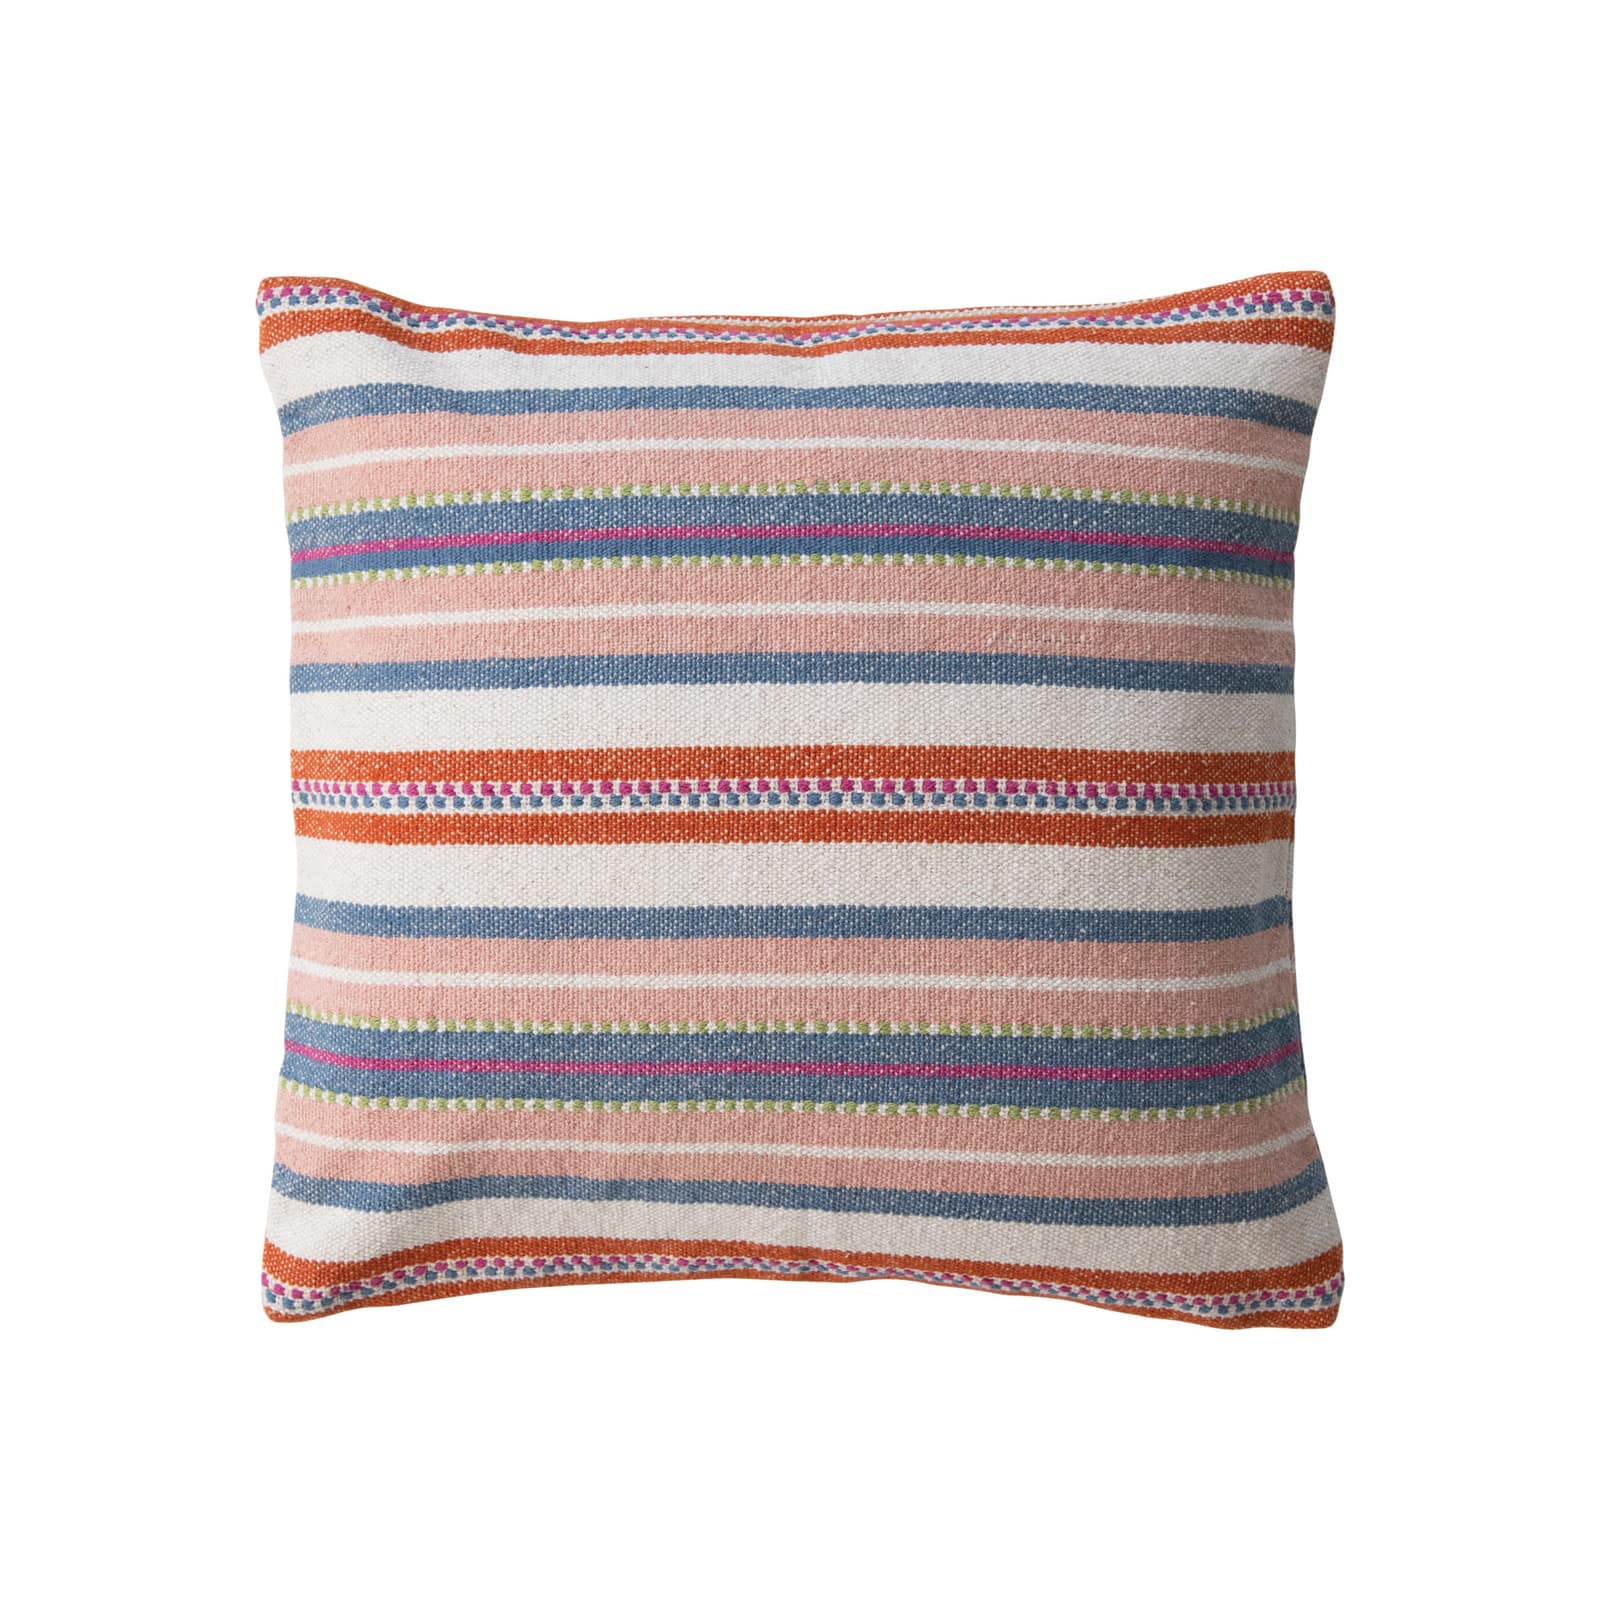 Woven Cotton Pillow With Stripes